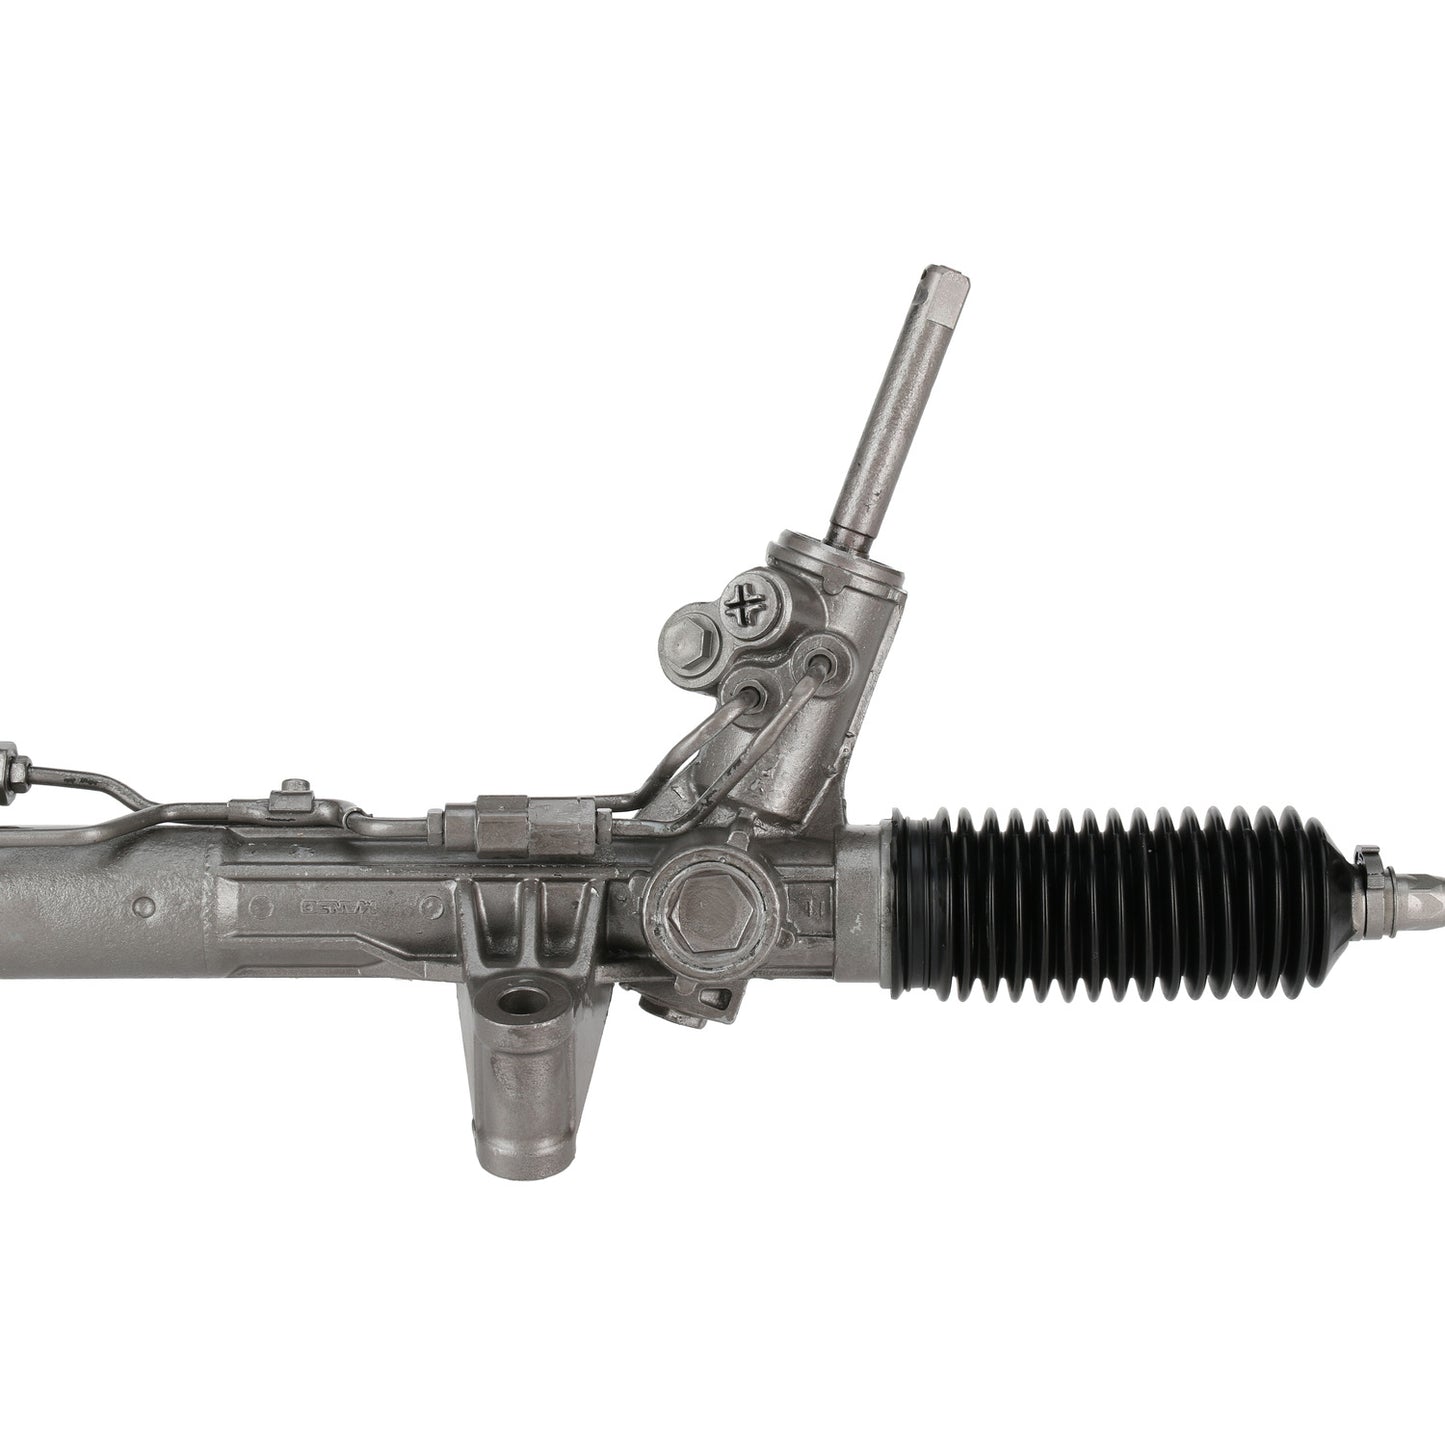 Rack and Pinion Assembly - MAVAL - Hydraulic Power - Remanufactured - 95505M